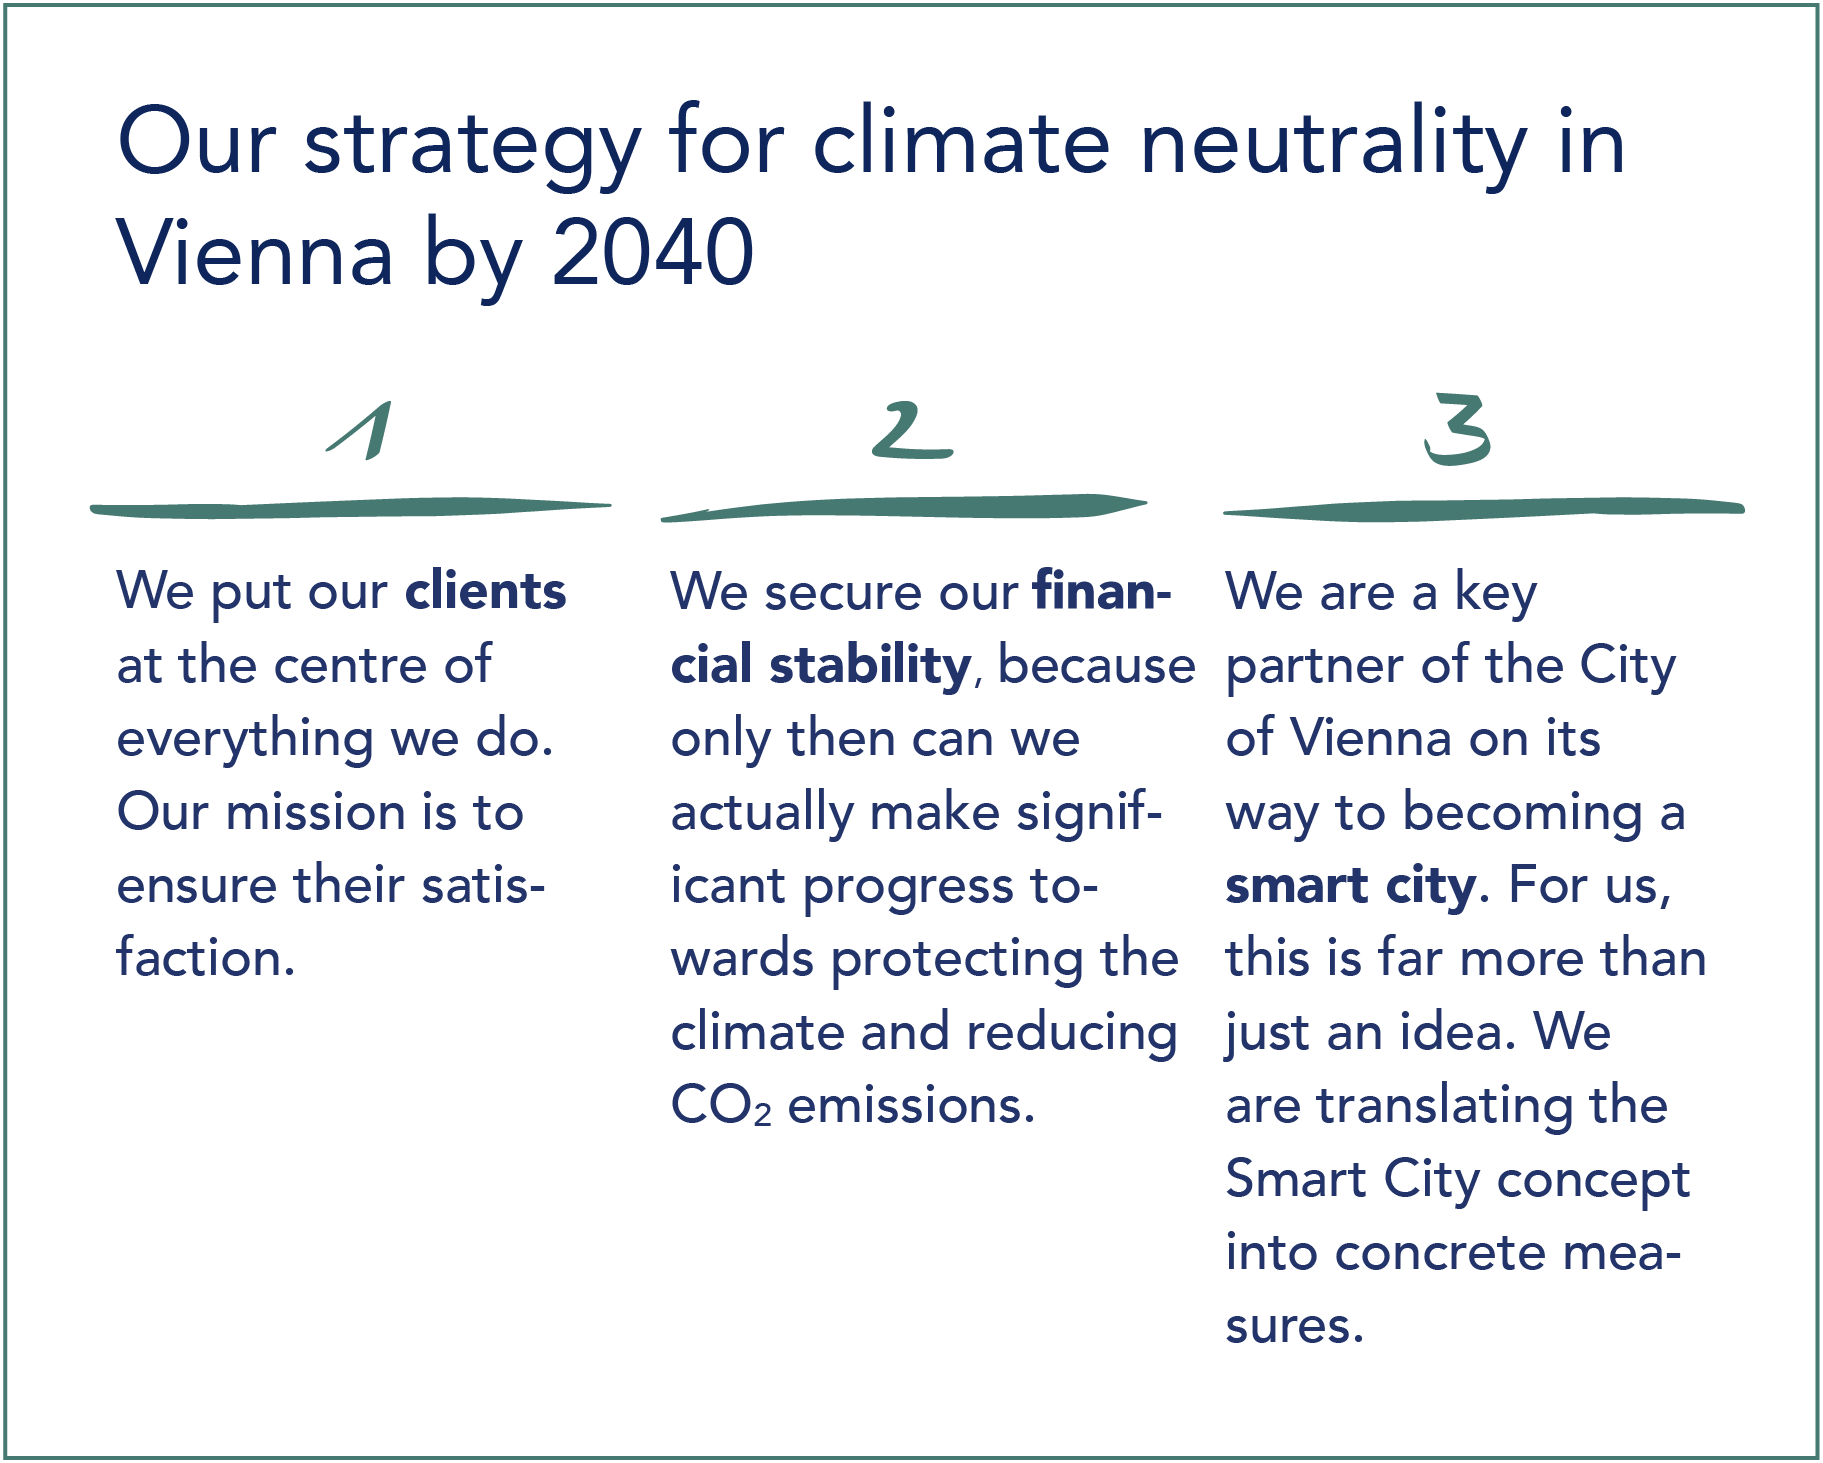 The corporate strategy of the Wiener Stadtwerke Group aims for a climate-neutral Vienna by 2040 and is strongly oriented towards the Smart City Strategy of the City of Vienna. Central components are the focus on customer satisfaction, securing the financial basis and the implementation of the Smart City Strategy through concrete measures.